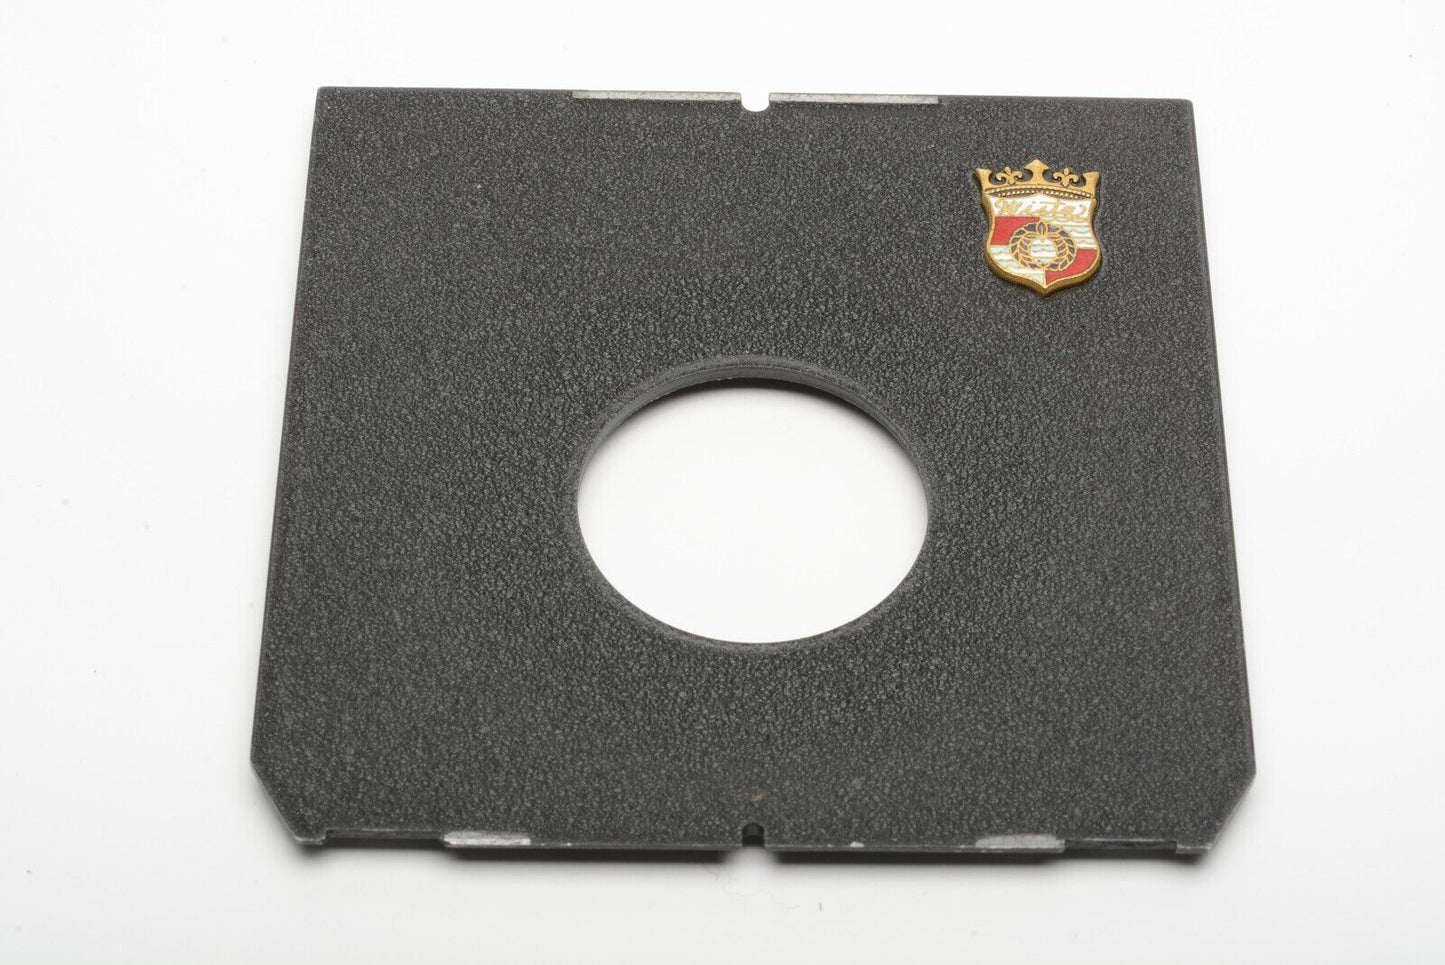 EXC++ LINHOF LENS BOARD FOR TECHNIKA CAMERAS, 35mm HOLE, VERY CLEAN